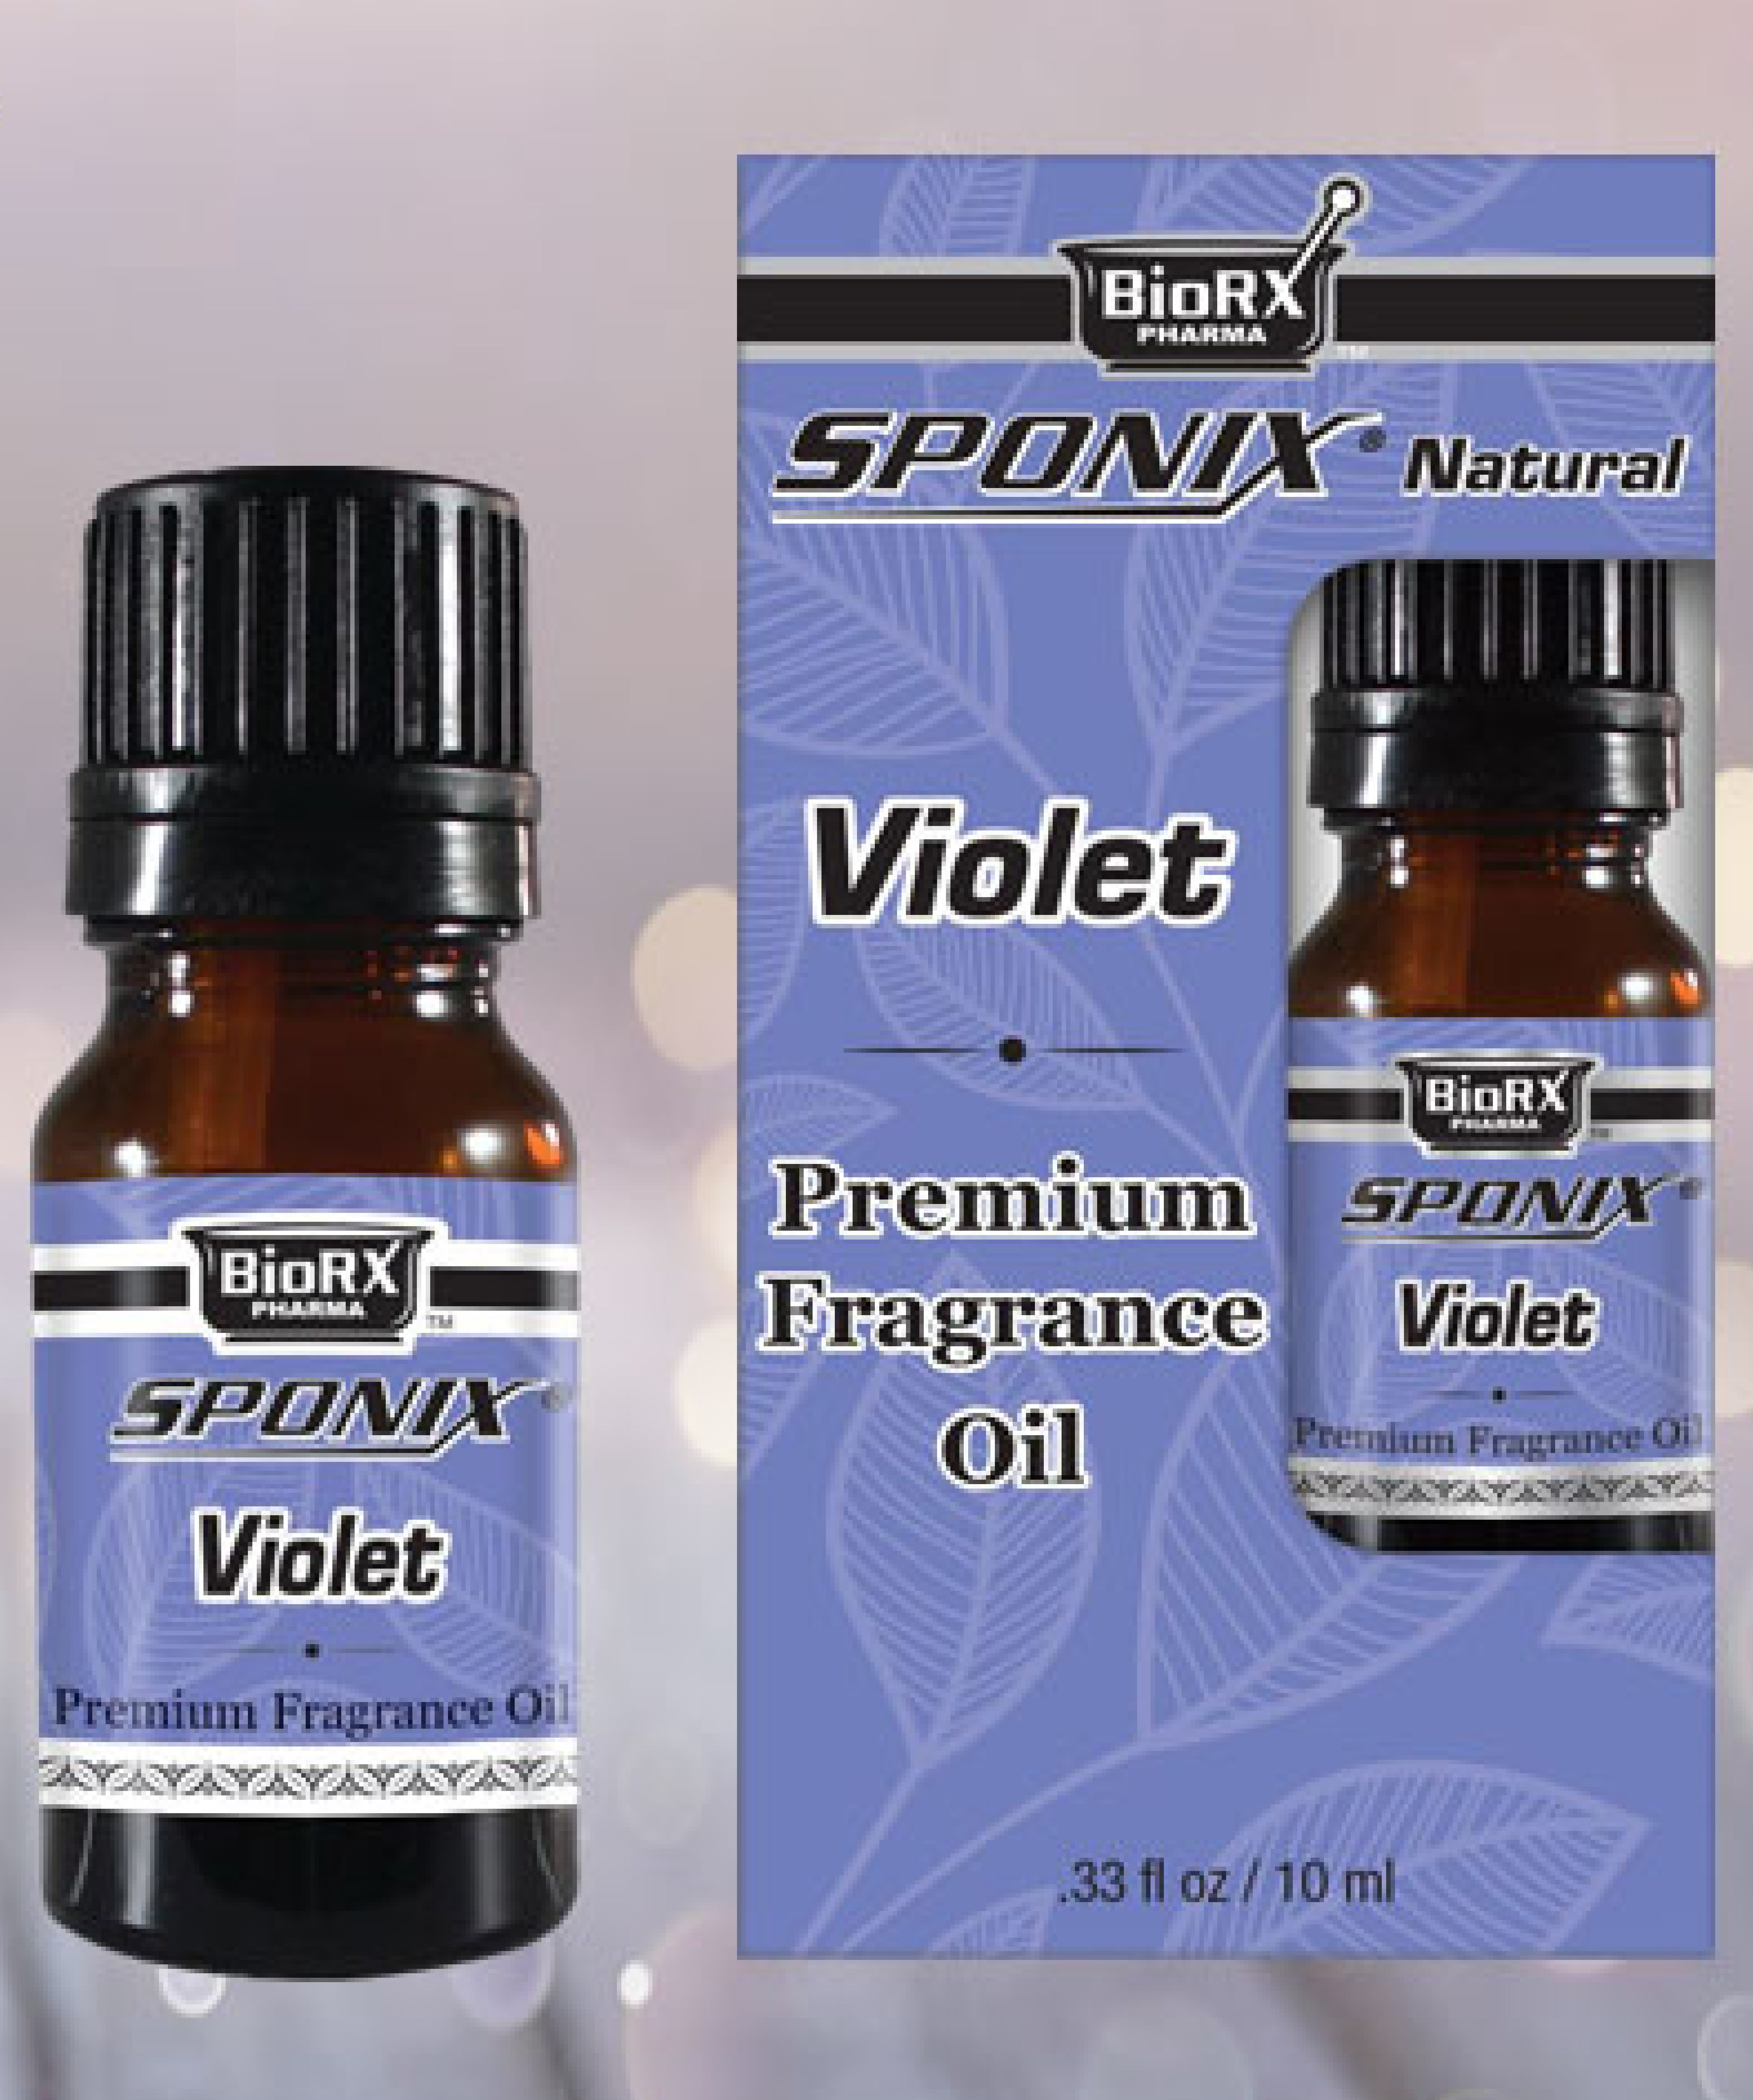 Lilac Fragrance Oil 10 mL (1/3 Oz) Aromatherapy - 100% Pure Organic  Aromatic Premium Essential Scented Perfume Oil by Sponix Made in USA 